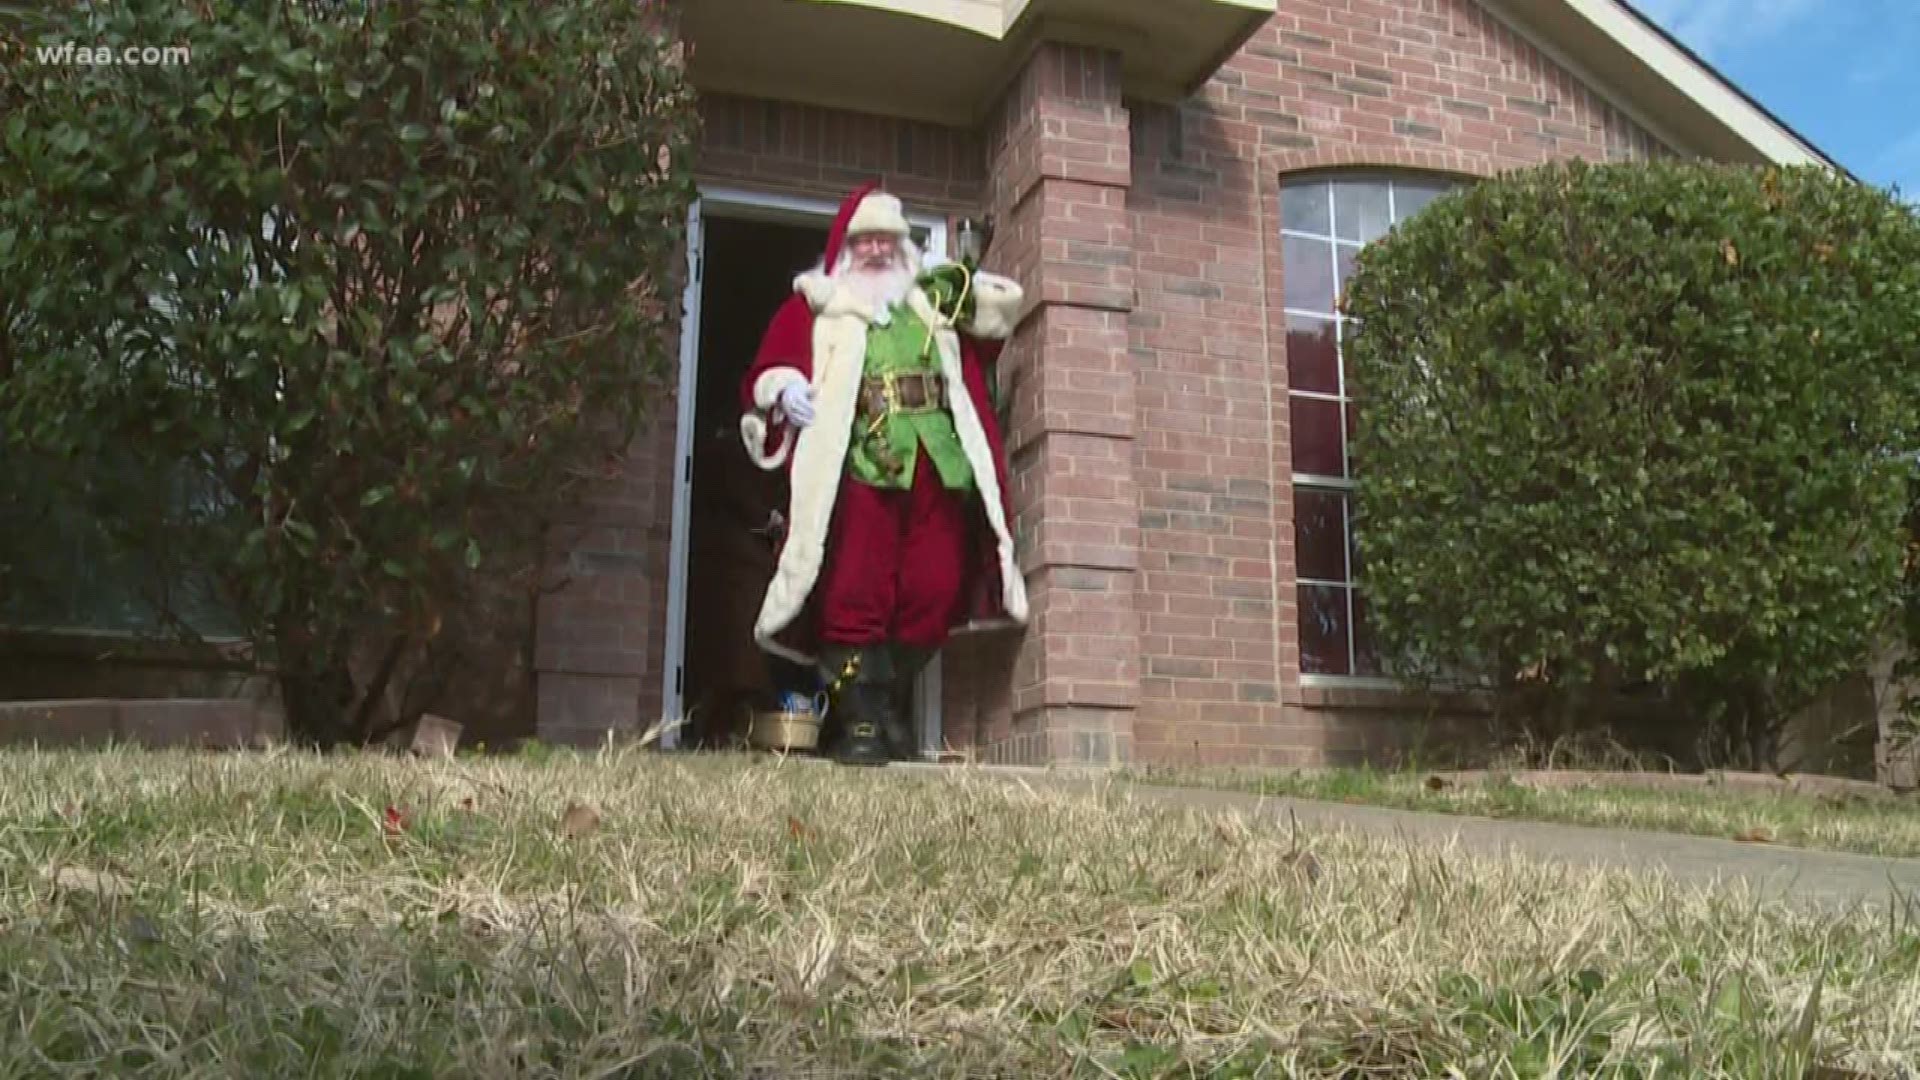 Santa receives surprising request, delivers Christmas miracle